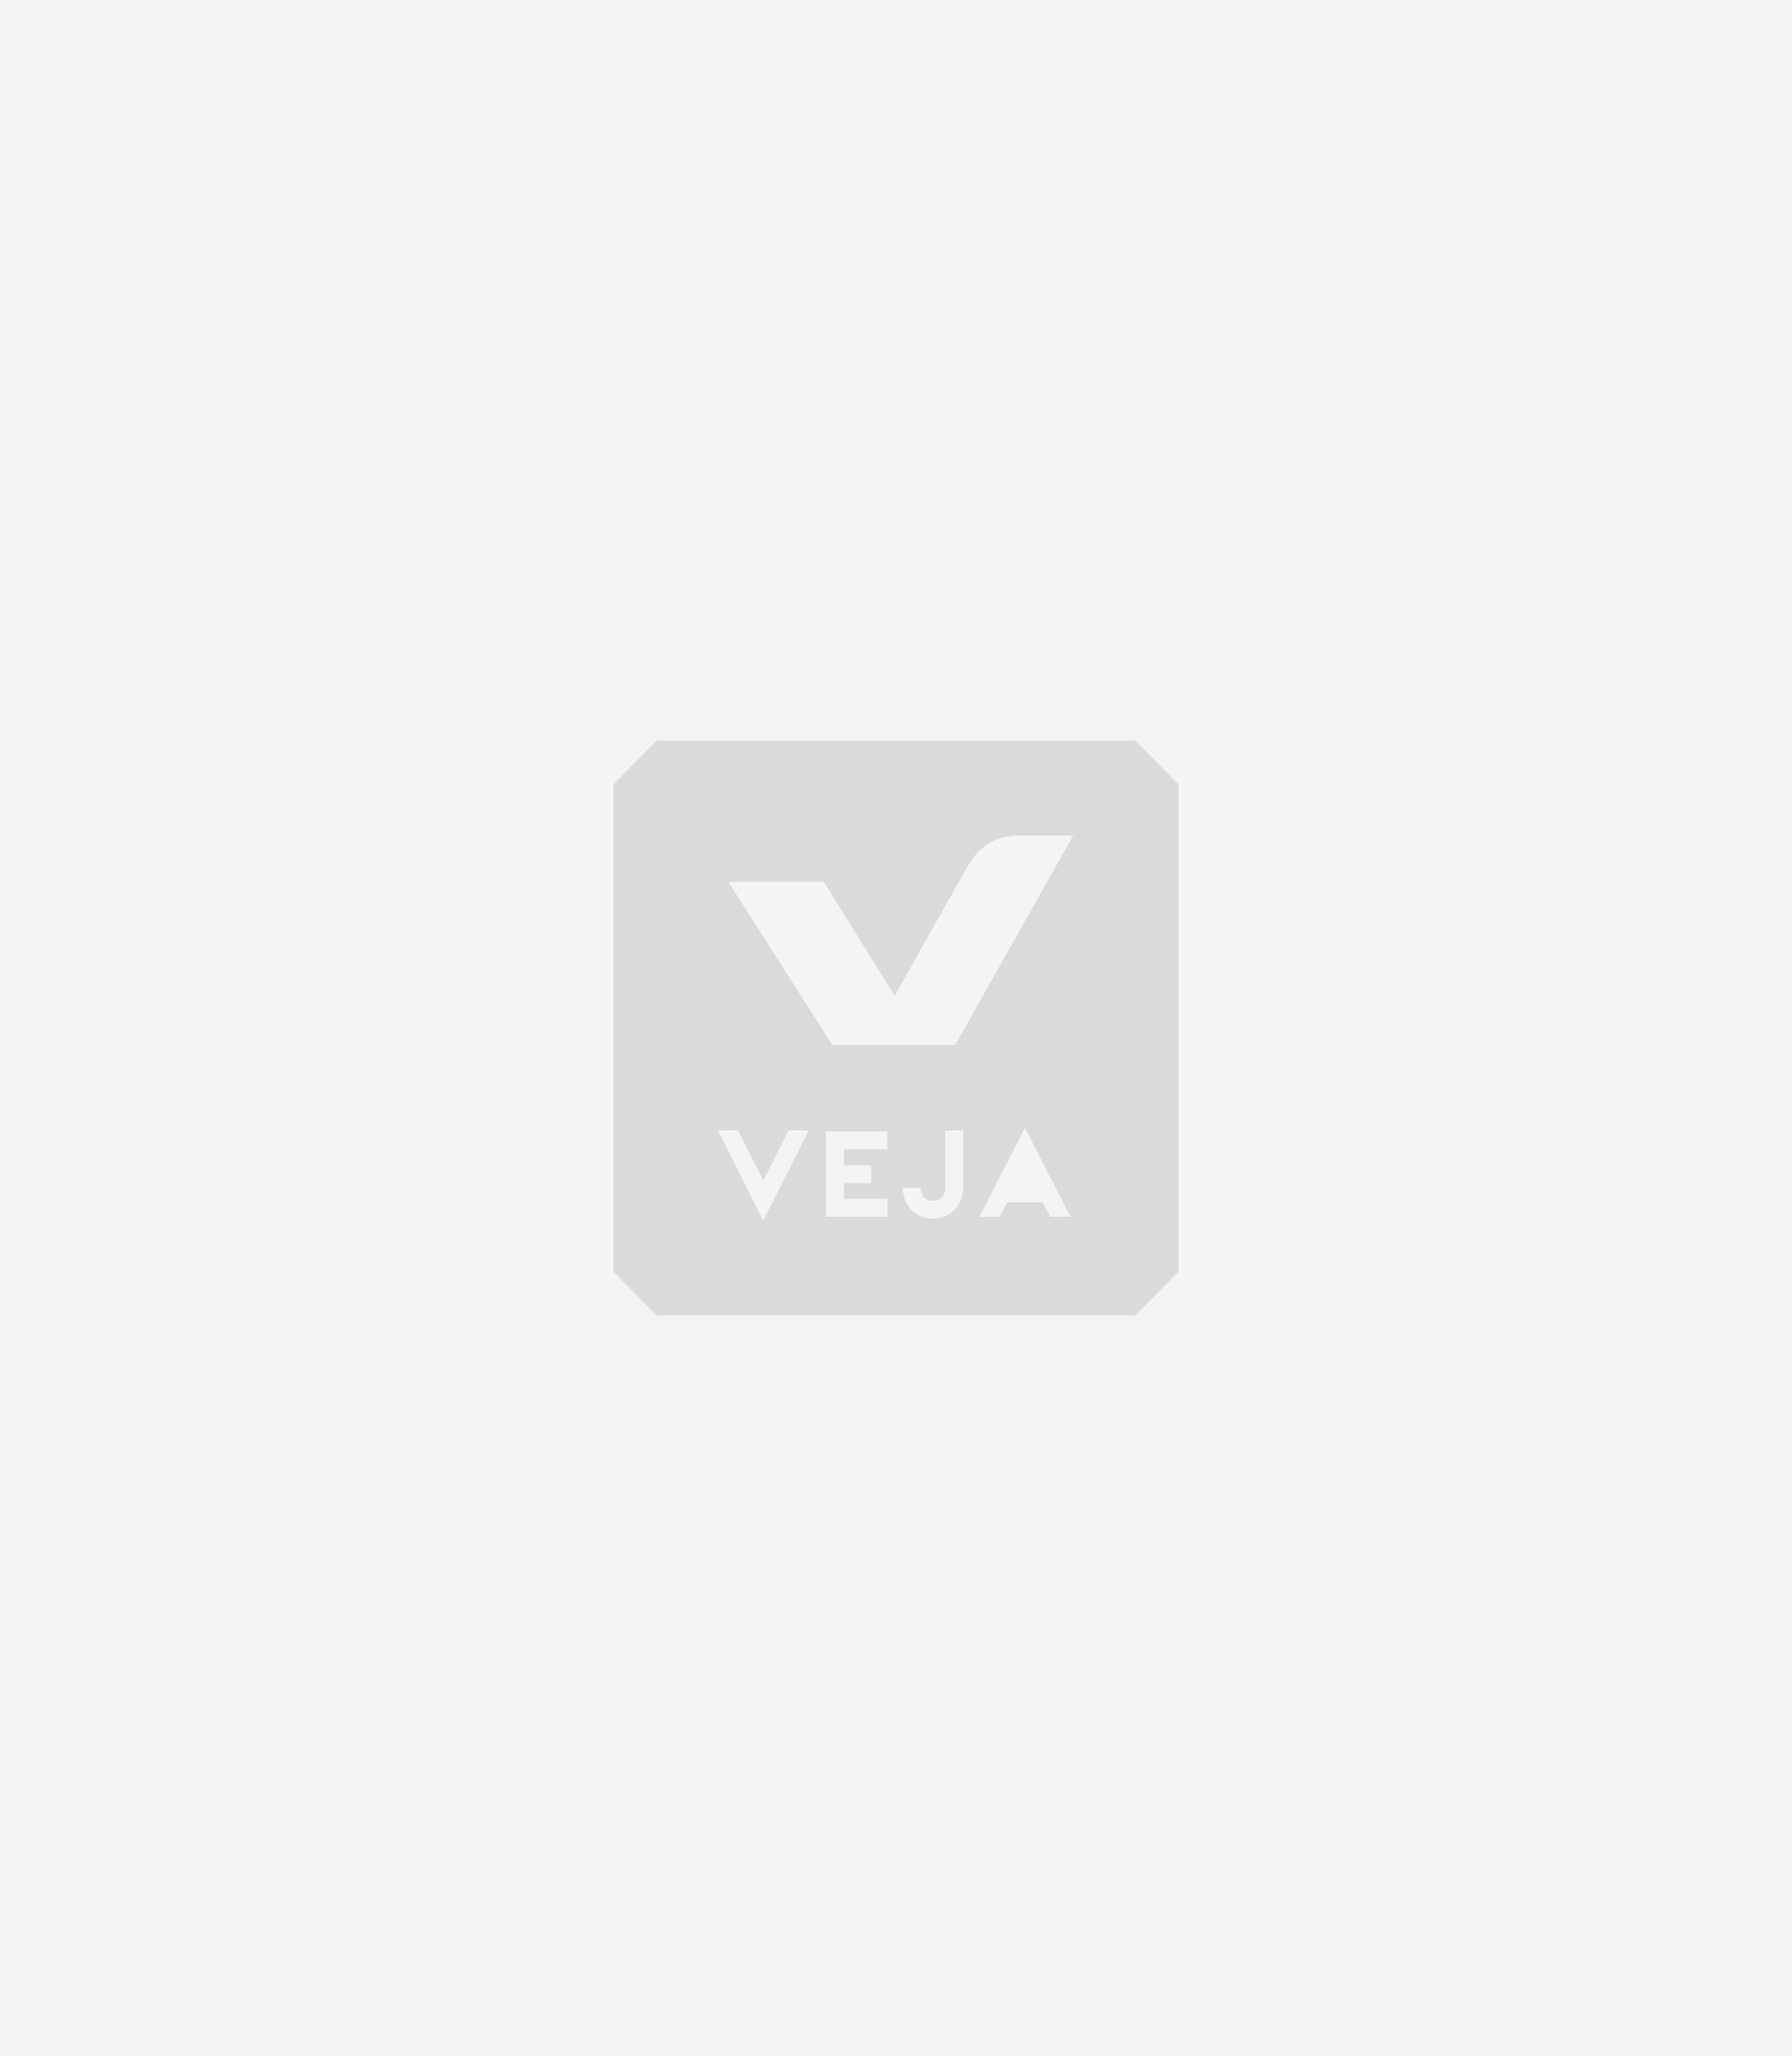 where to buy veja shoes near me